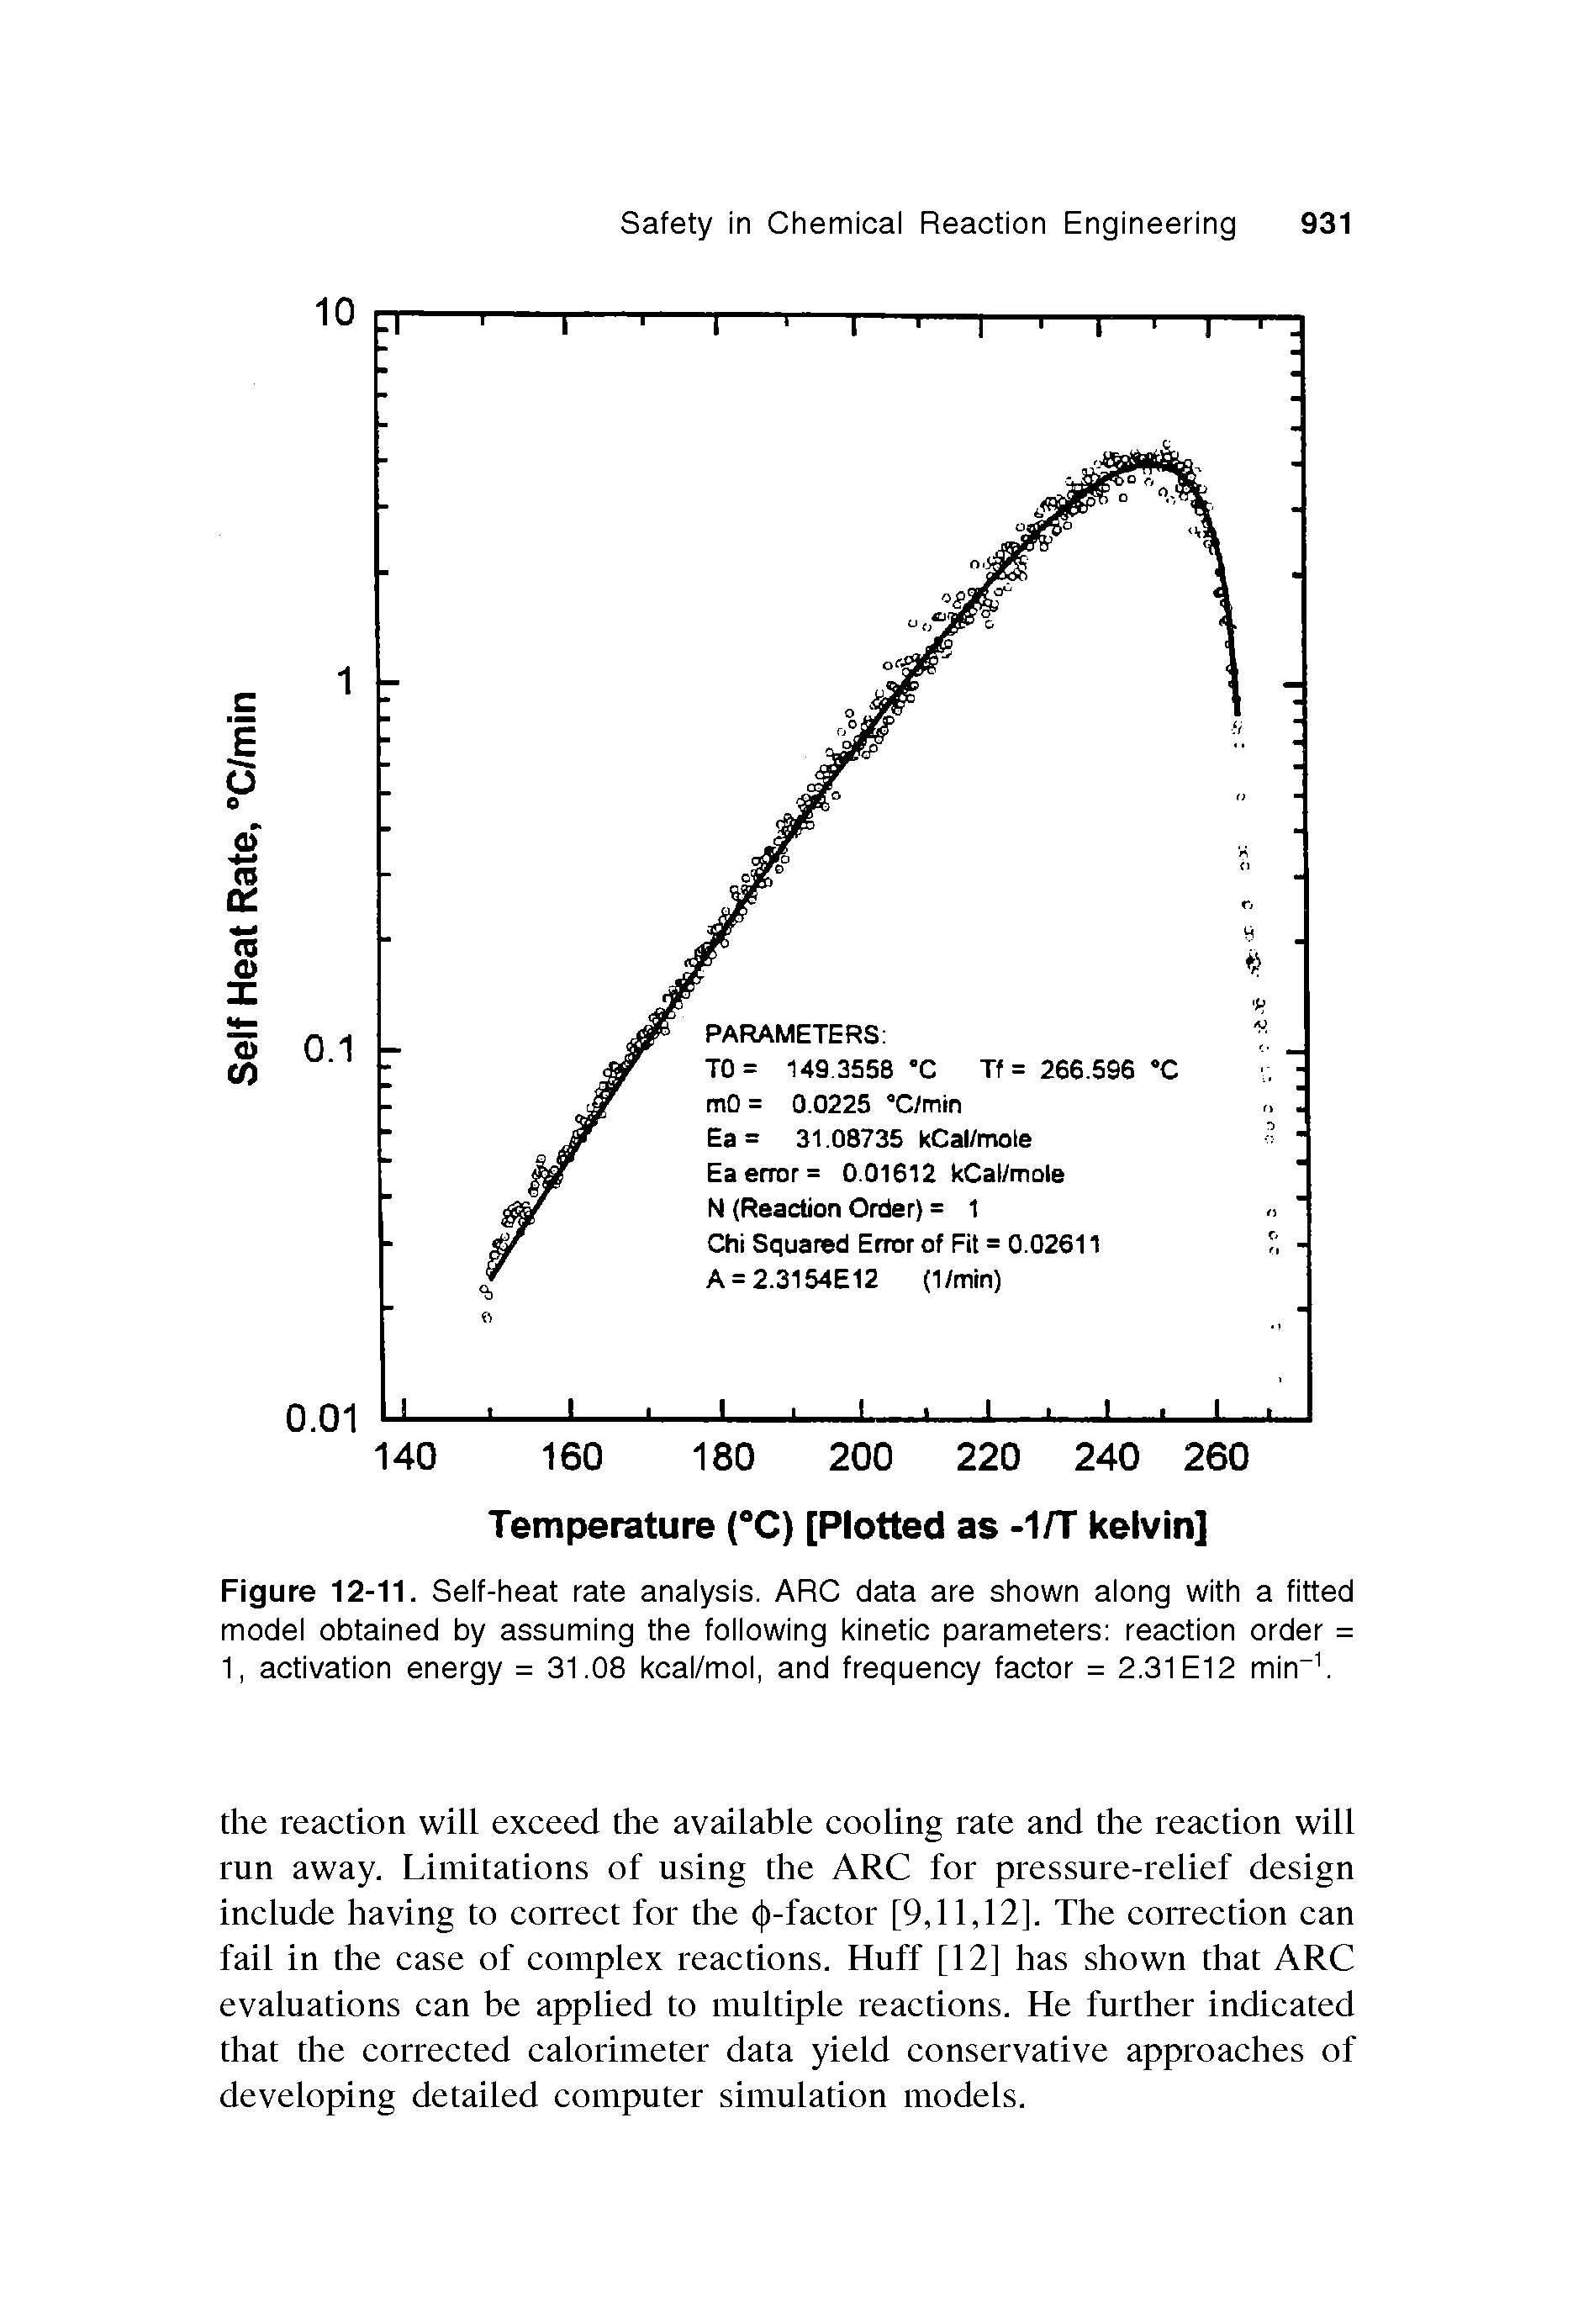 Figure 12-11. Self-heat rate analysis. ARC data are shown along with a fitted model obtained by assuming the following kinetic parameters reaction order = 1, activation energy = 31.08 kcal/mol, and frequency factor = 2.31 El 2 min ...